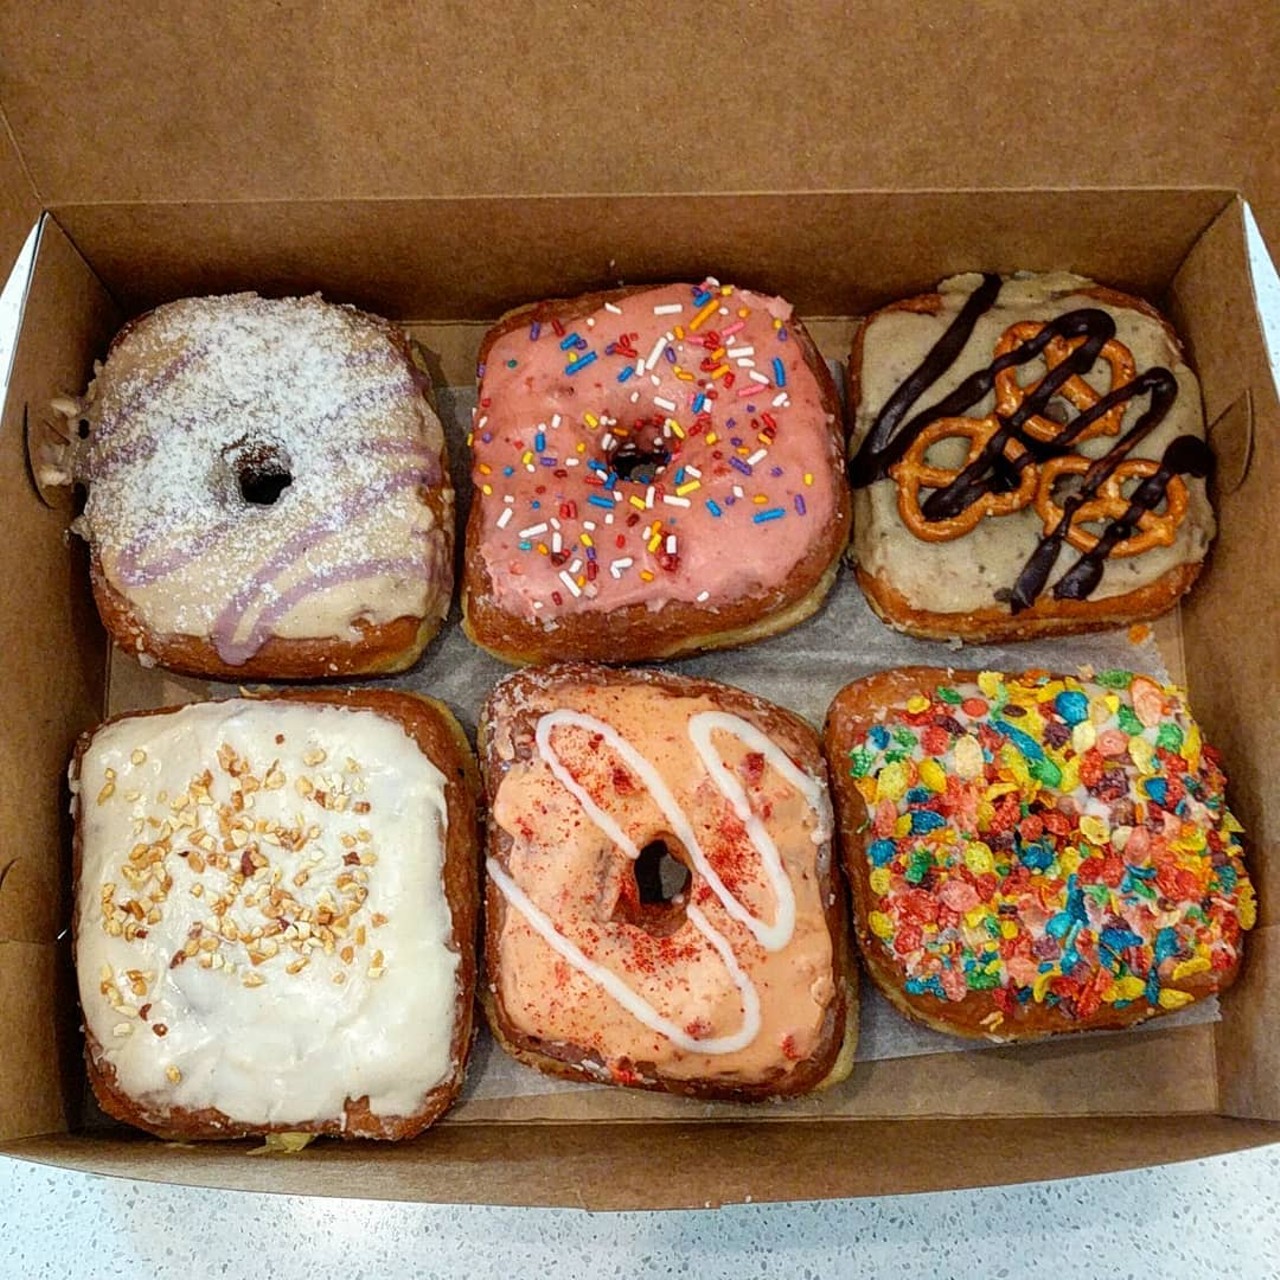 Valkyrie Doughnuts 
12226 Corporate Blvd, Orlando, FL 32817
If you love donuts, but can&#146;t have dairy, Valkyrie Doughnuts has your back! Their donuts are egg and dairy-free and super delicious.
Photo via Valkyrie Doughnuts/Facebook